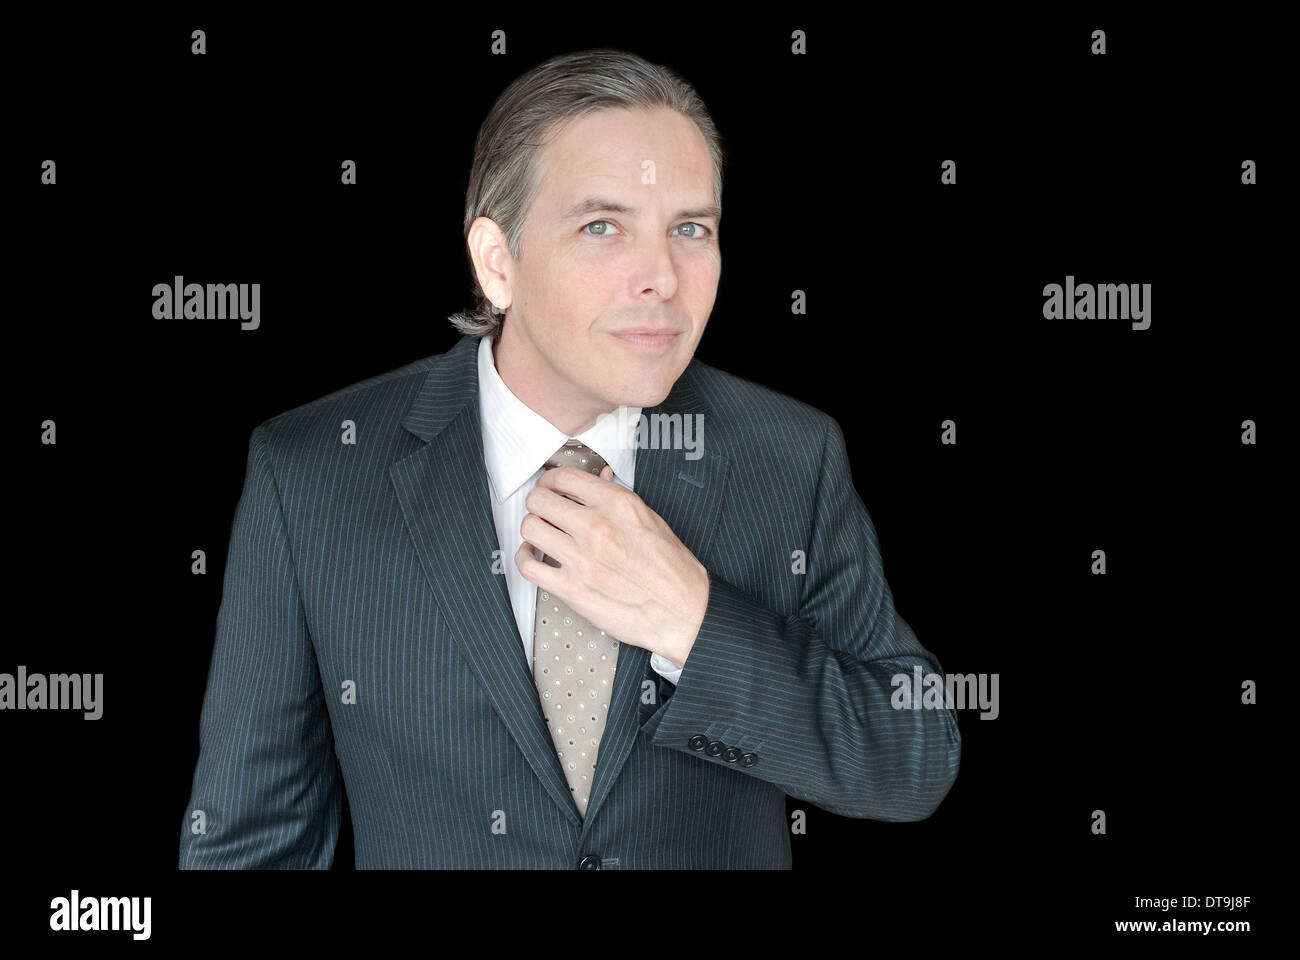 Close-up of a businessman adjusting his tie, waist-up. Stock Photo